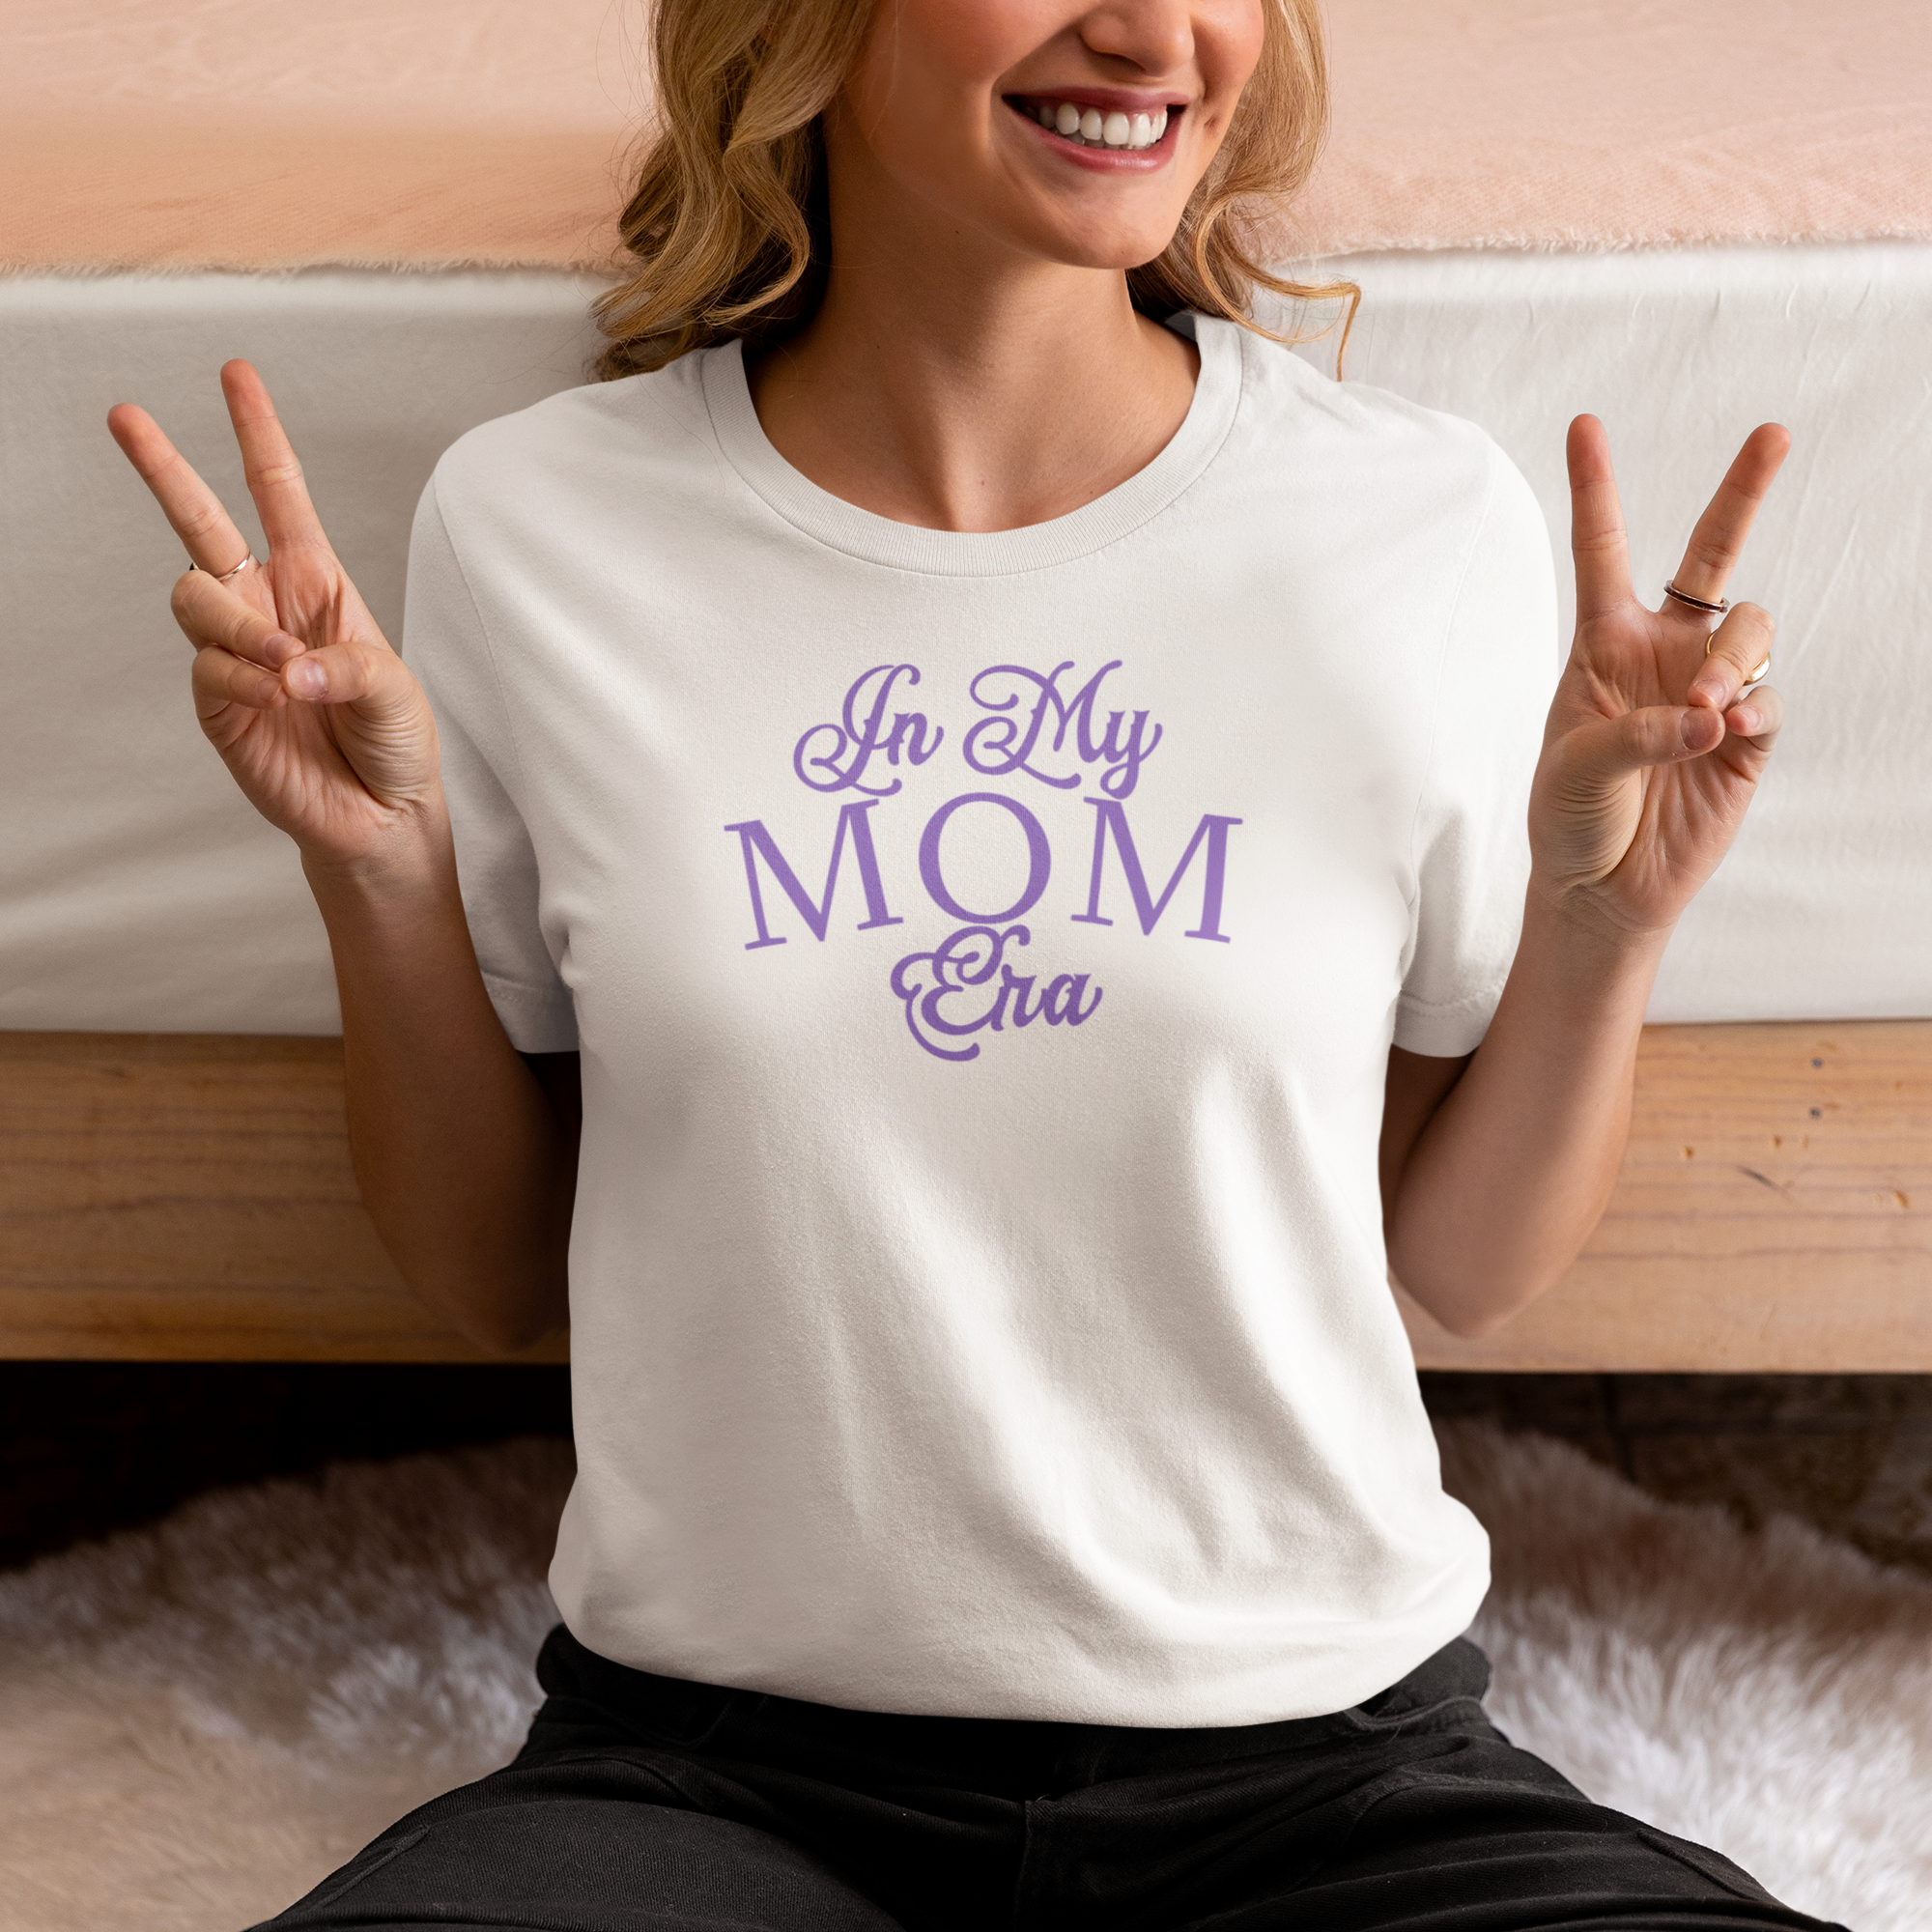 crewneck-tee-mockup-of-a-woman-making-peace-signs-with-her-hands-m37293.png